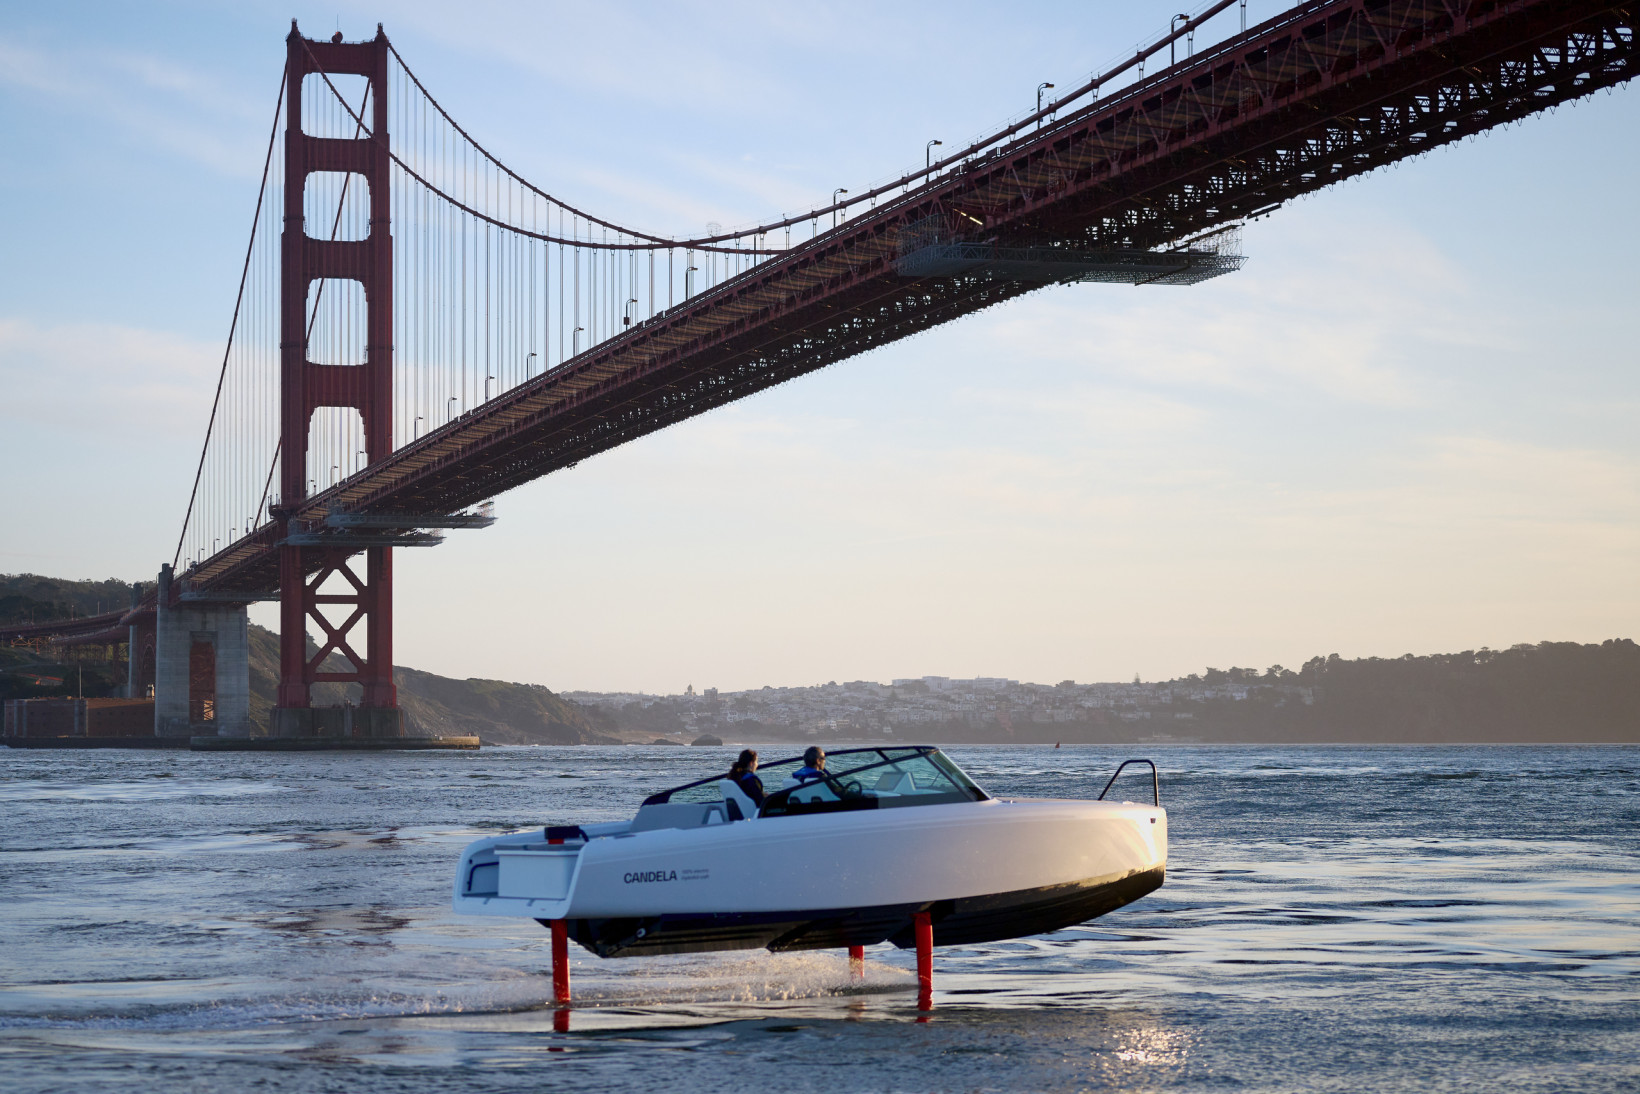 an image of the candela c-8 by golden gate bridge